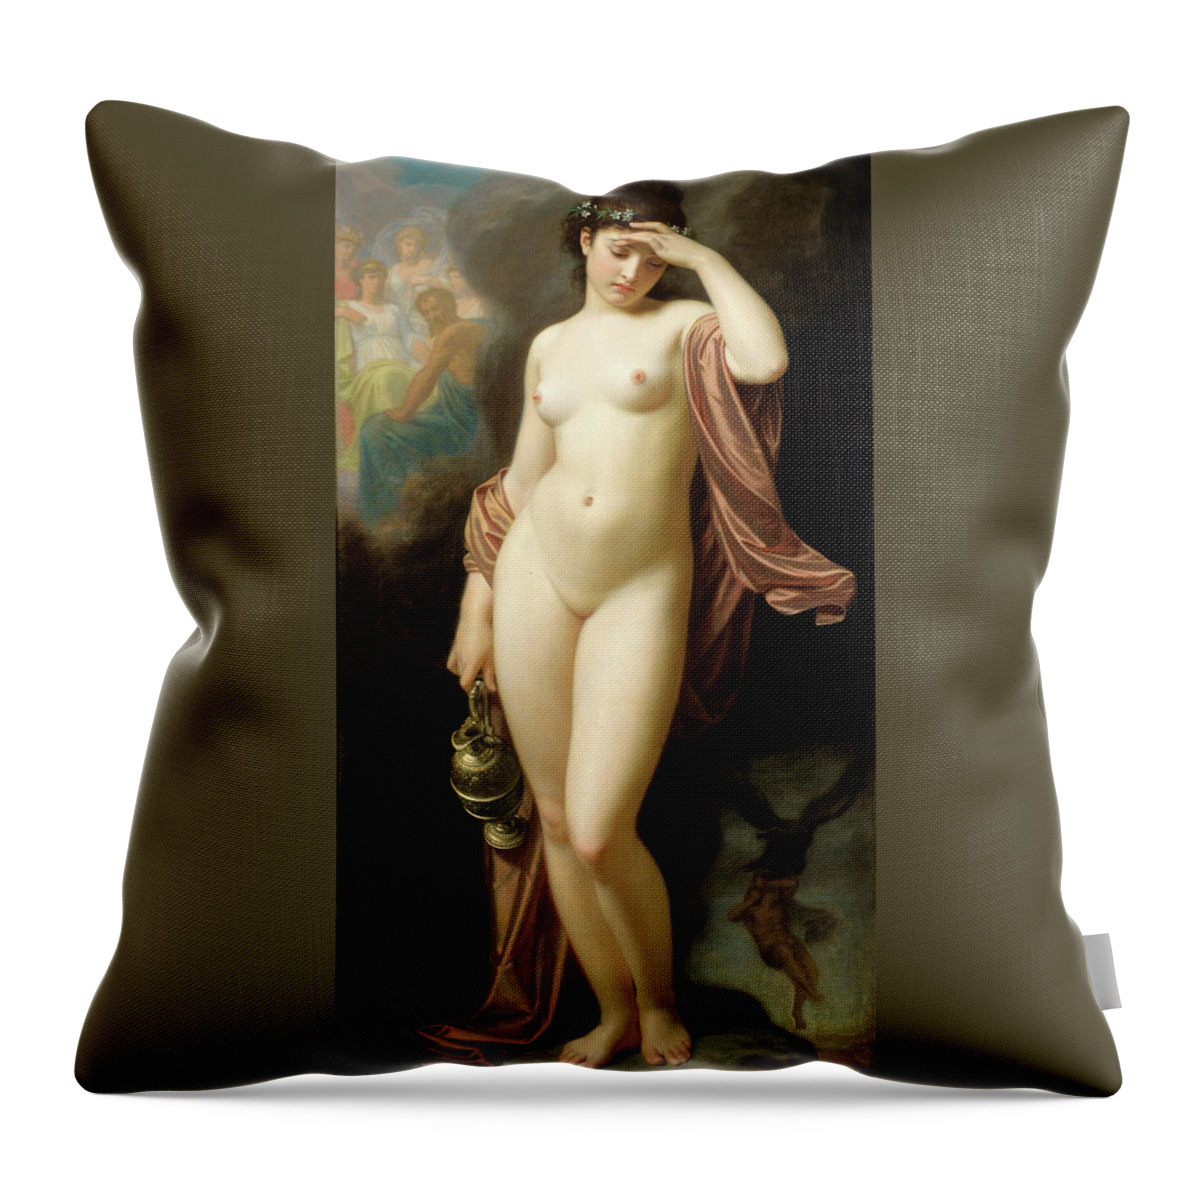 Hugues Merle Throw Pillow featuring the painting Hebe Day-Dreaming or Hebe after her Fall by Hugues Merle